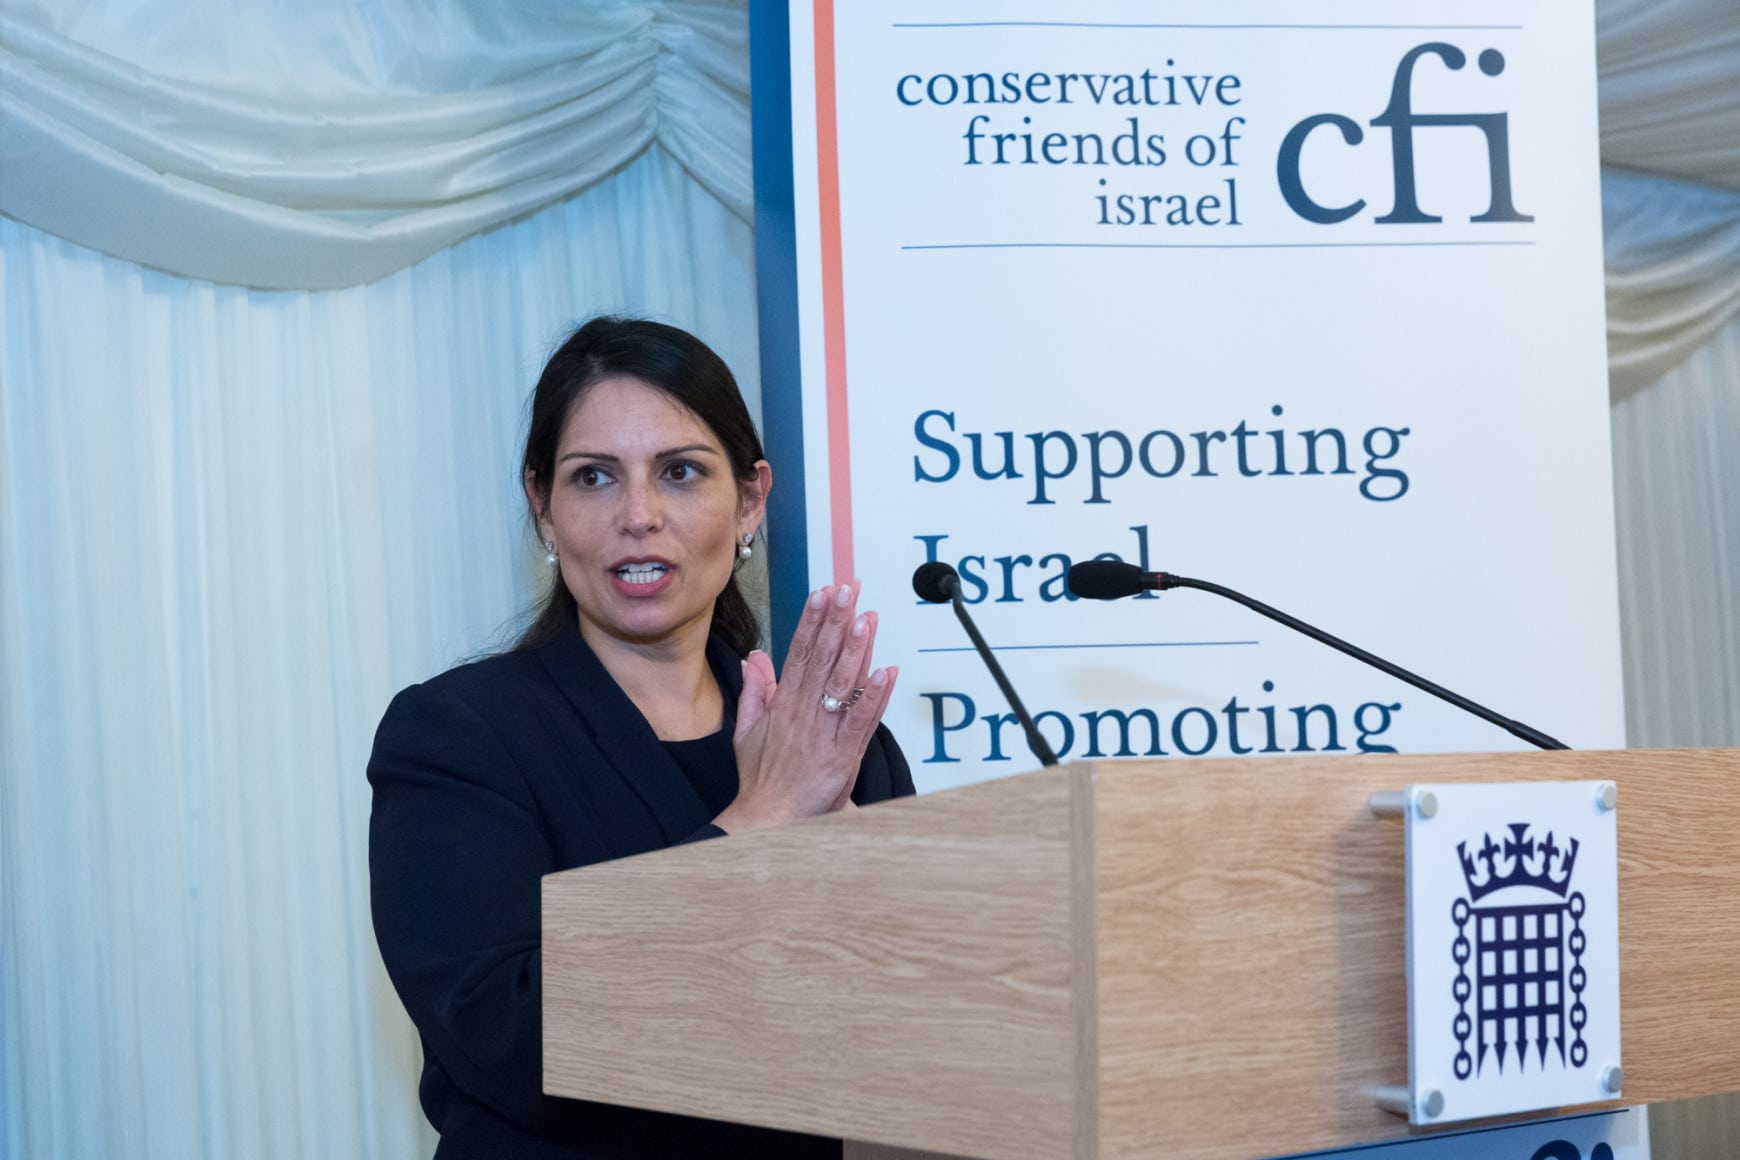 Home Secretary underlines UK Government’s “unflinching” support for the State of Israel at CFI Parliamentary Reception